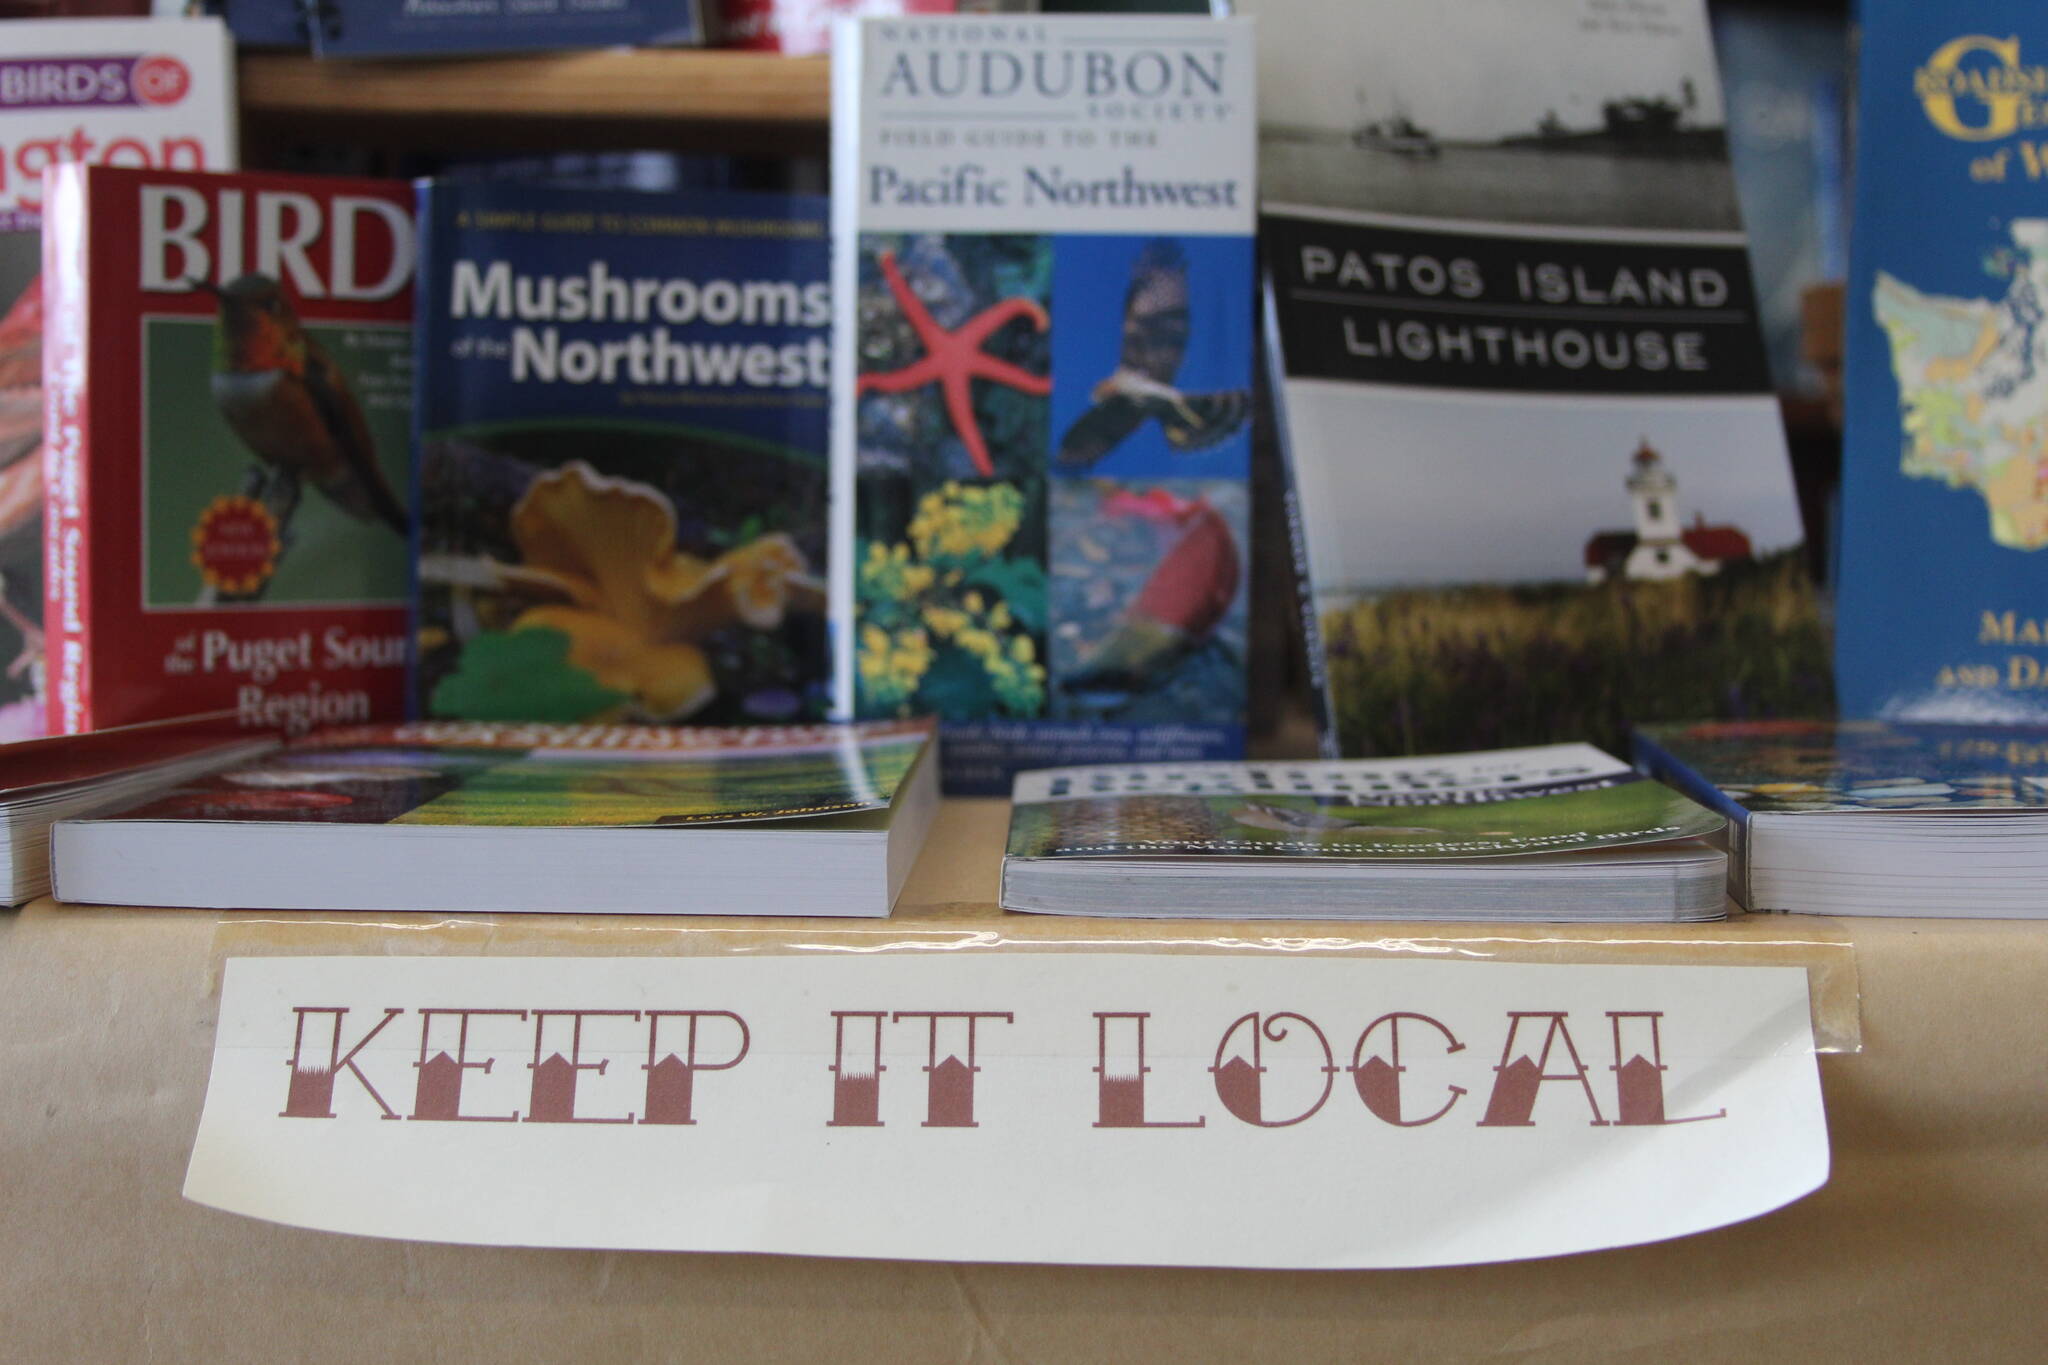 Photo by Karina Andrew/Whidbey News-Times
Wind and Tide Bookstore owner Karen Mueller has found her niche in the bookstore market by focusing part of her inventory on local guide and information books.